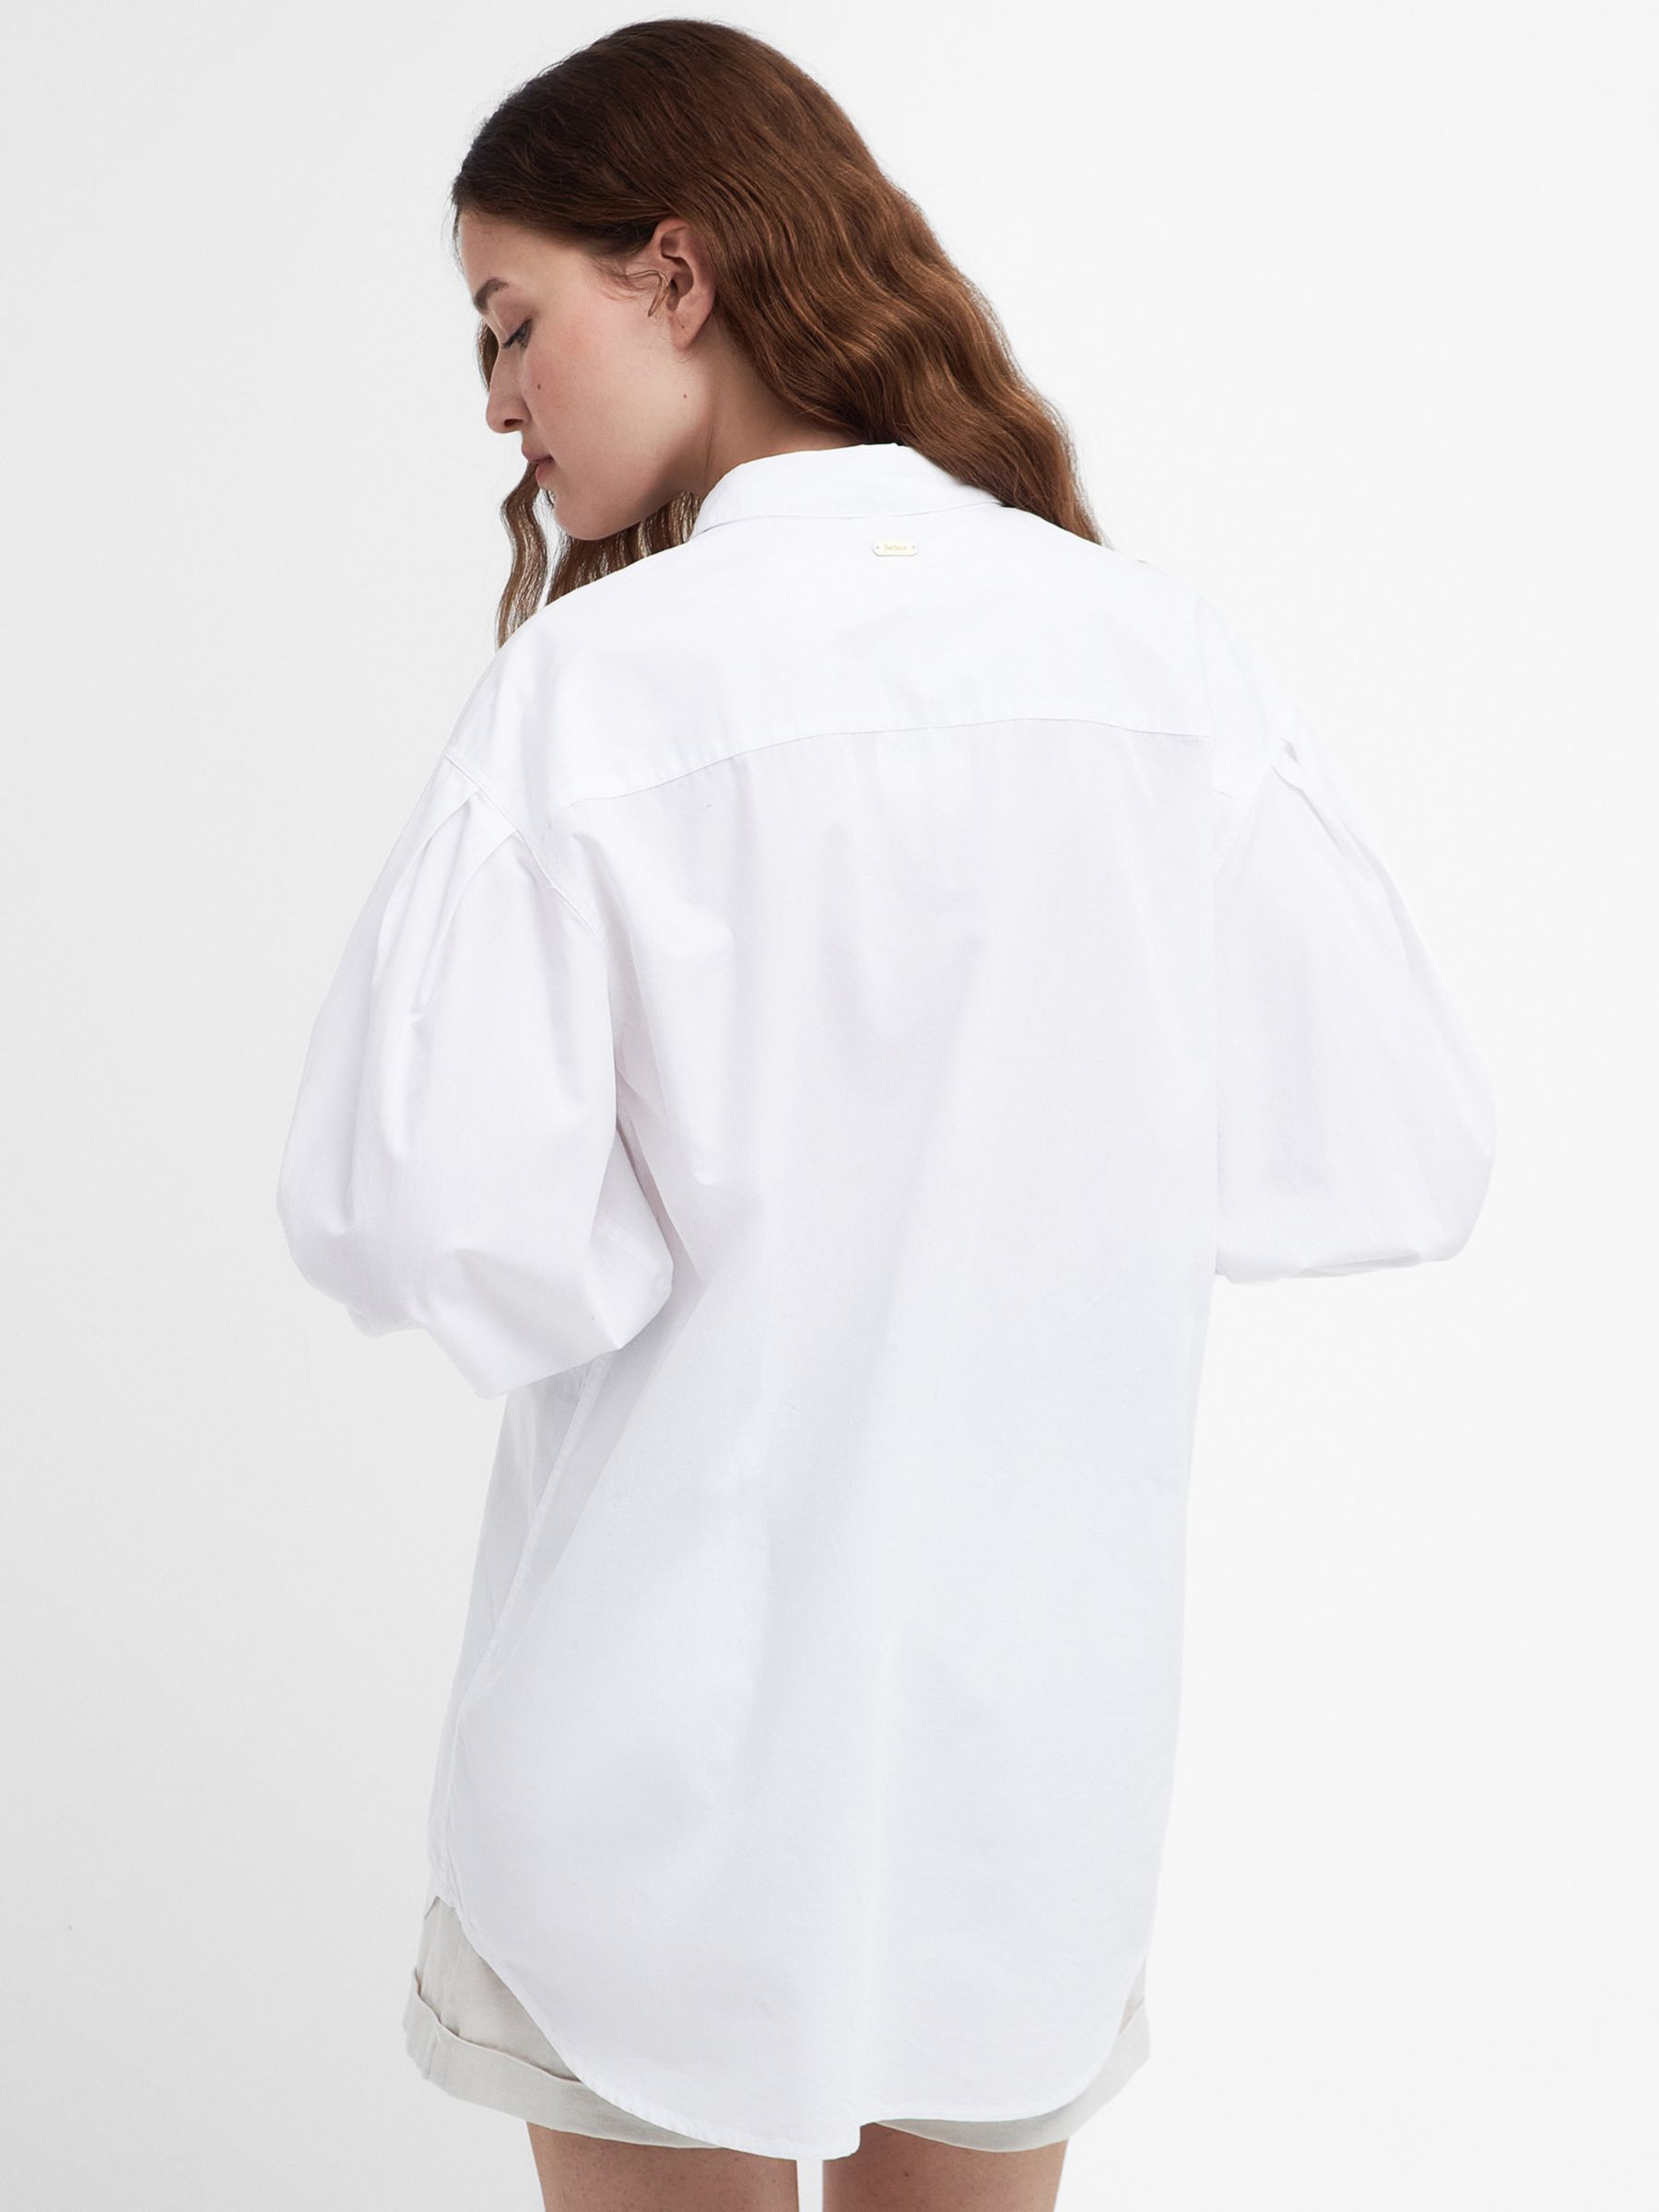 Barbour Catherine Oversized Cotton Shirt, White at John Lewis & Partners